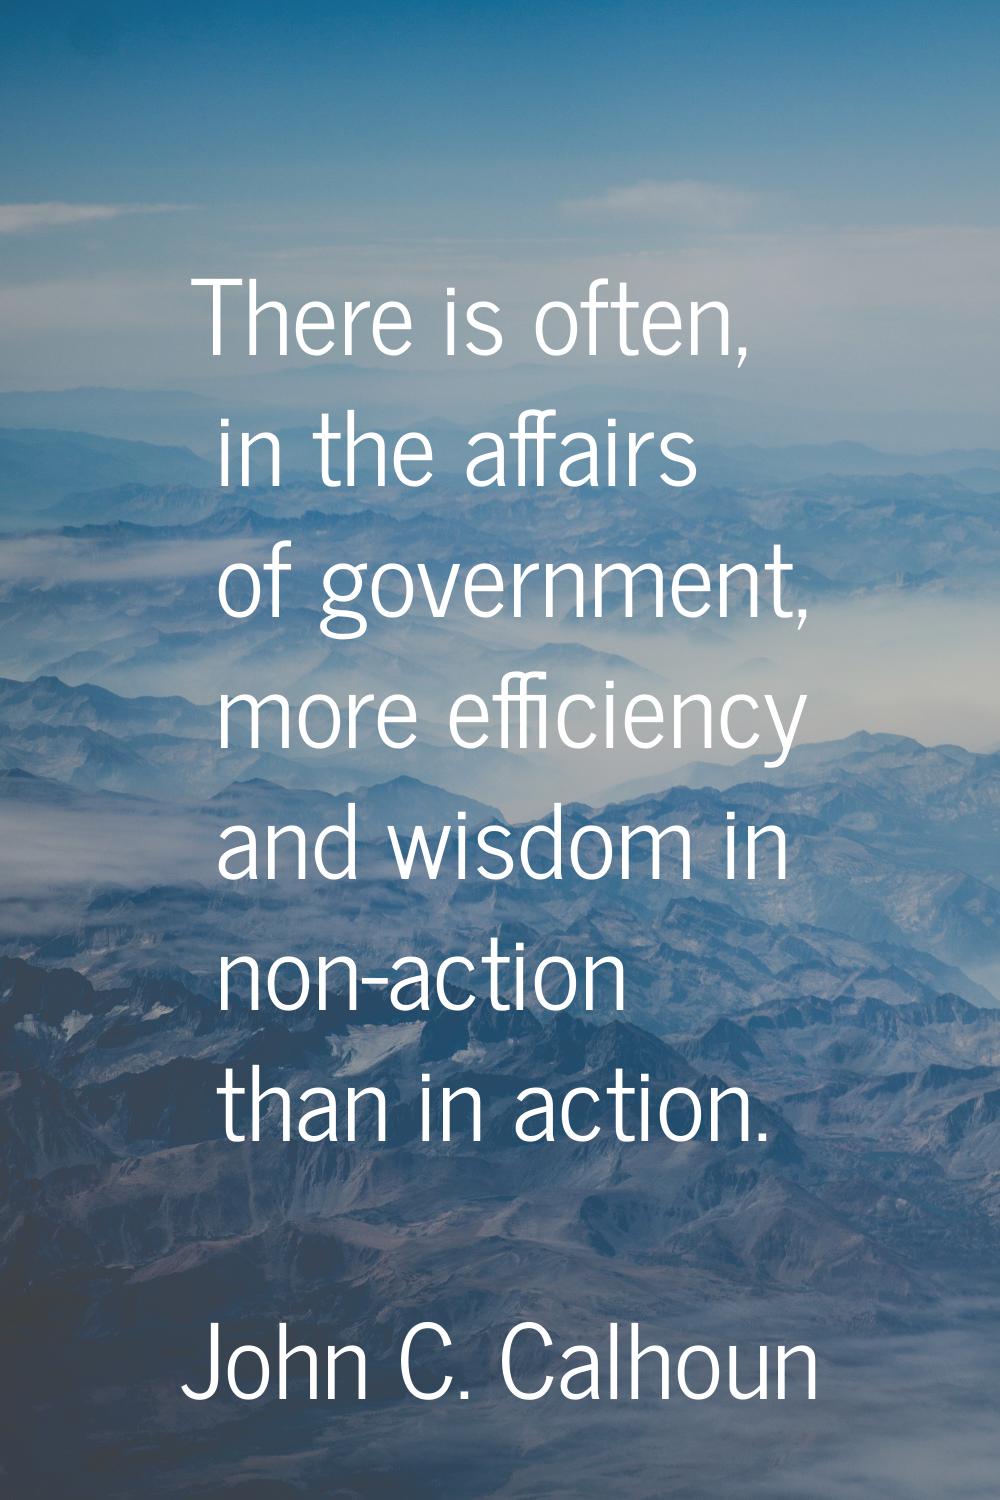 There is often, in the affairs of government, more efficiency and wisdom in non-action than in acti